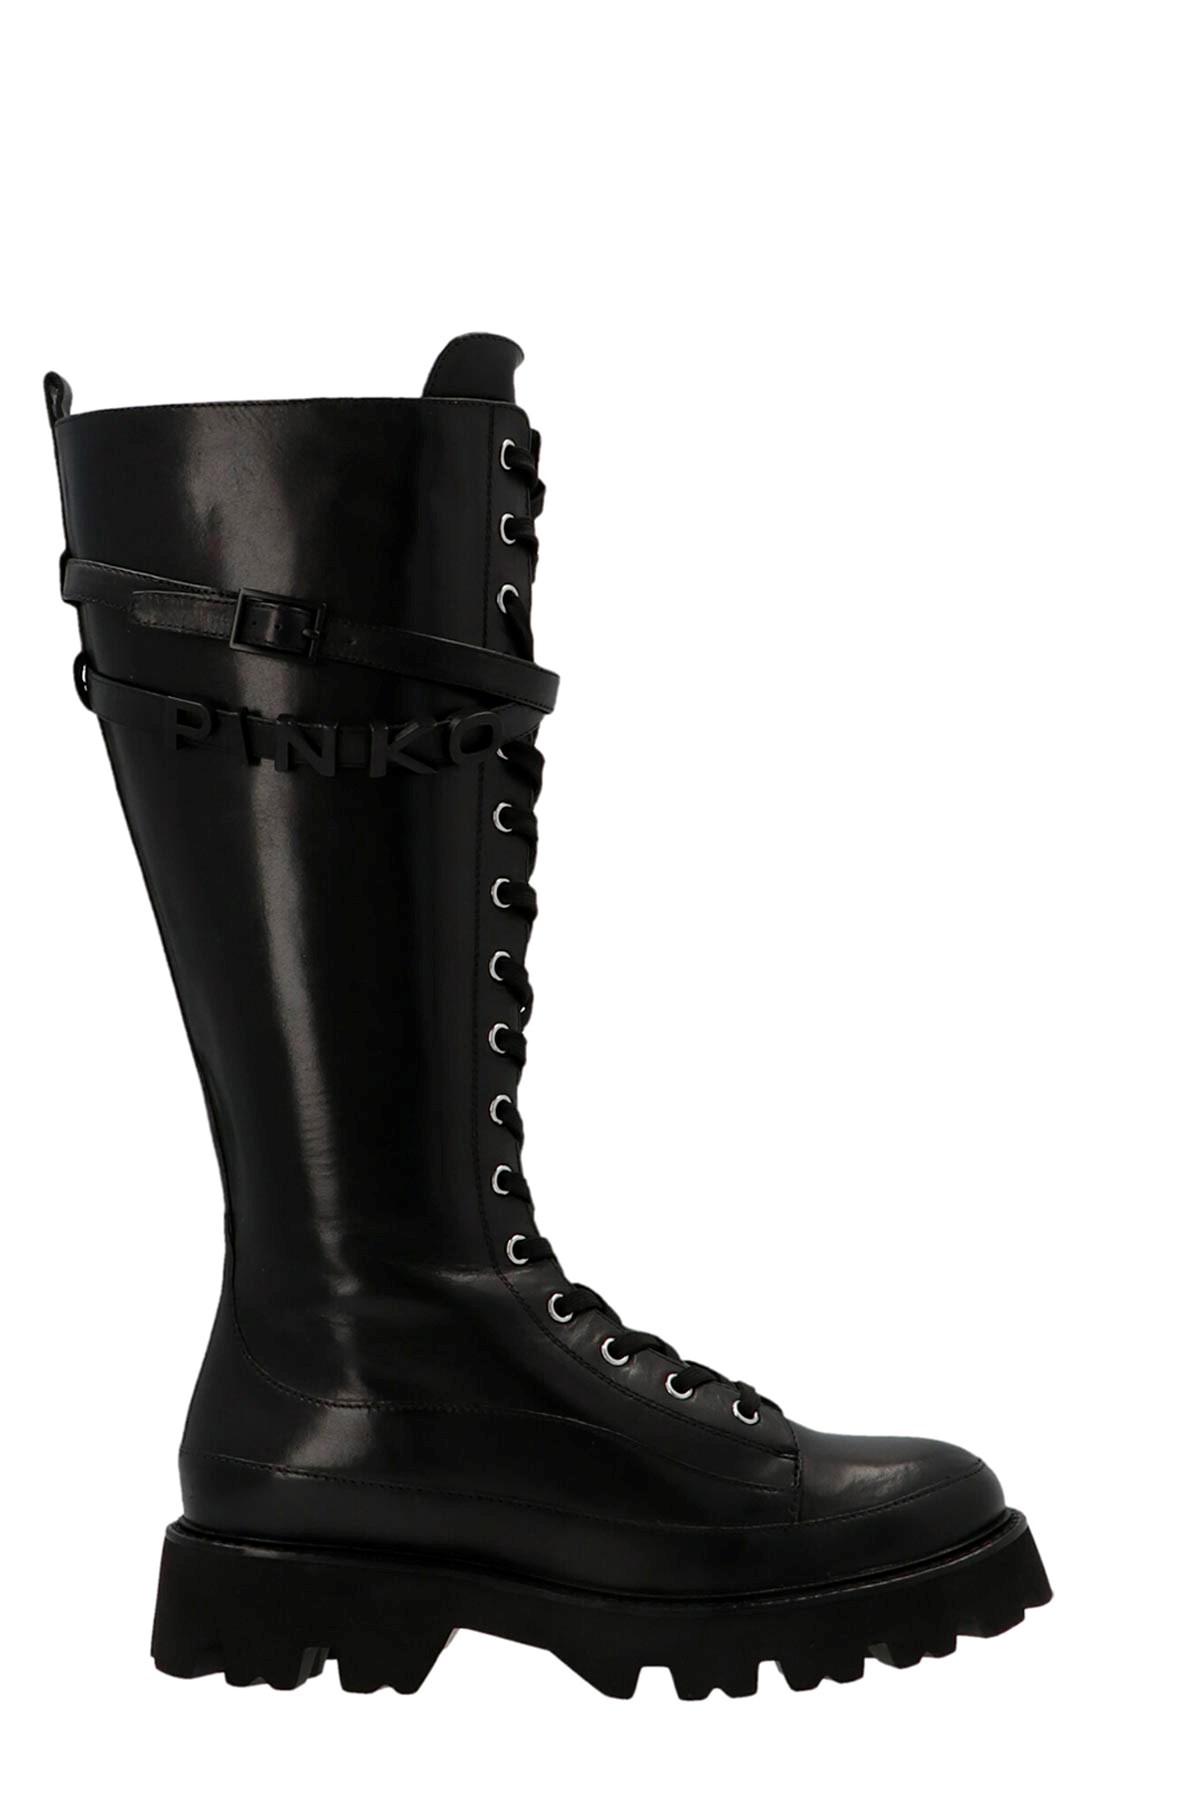 PINKO High Combat Boots With A Strap